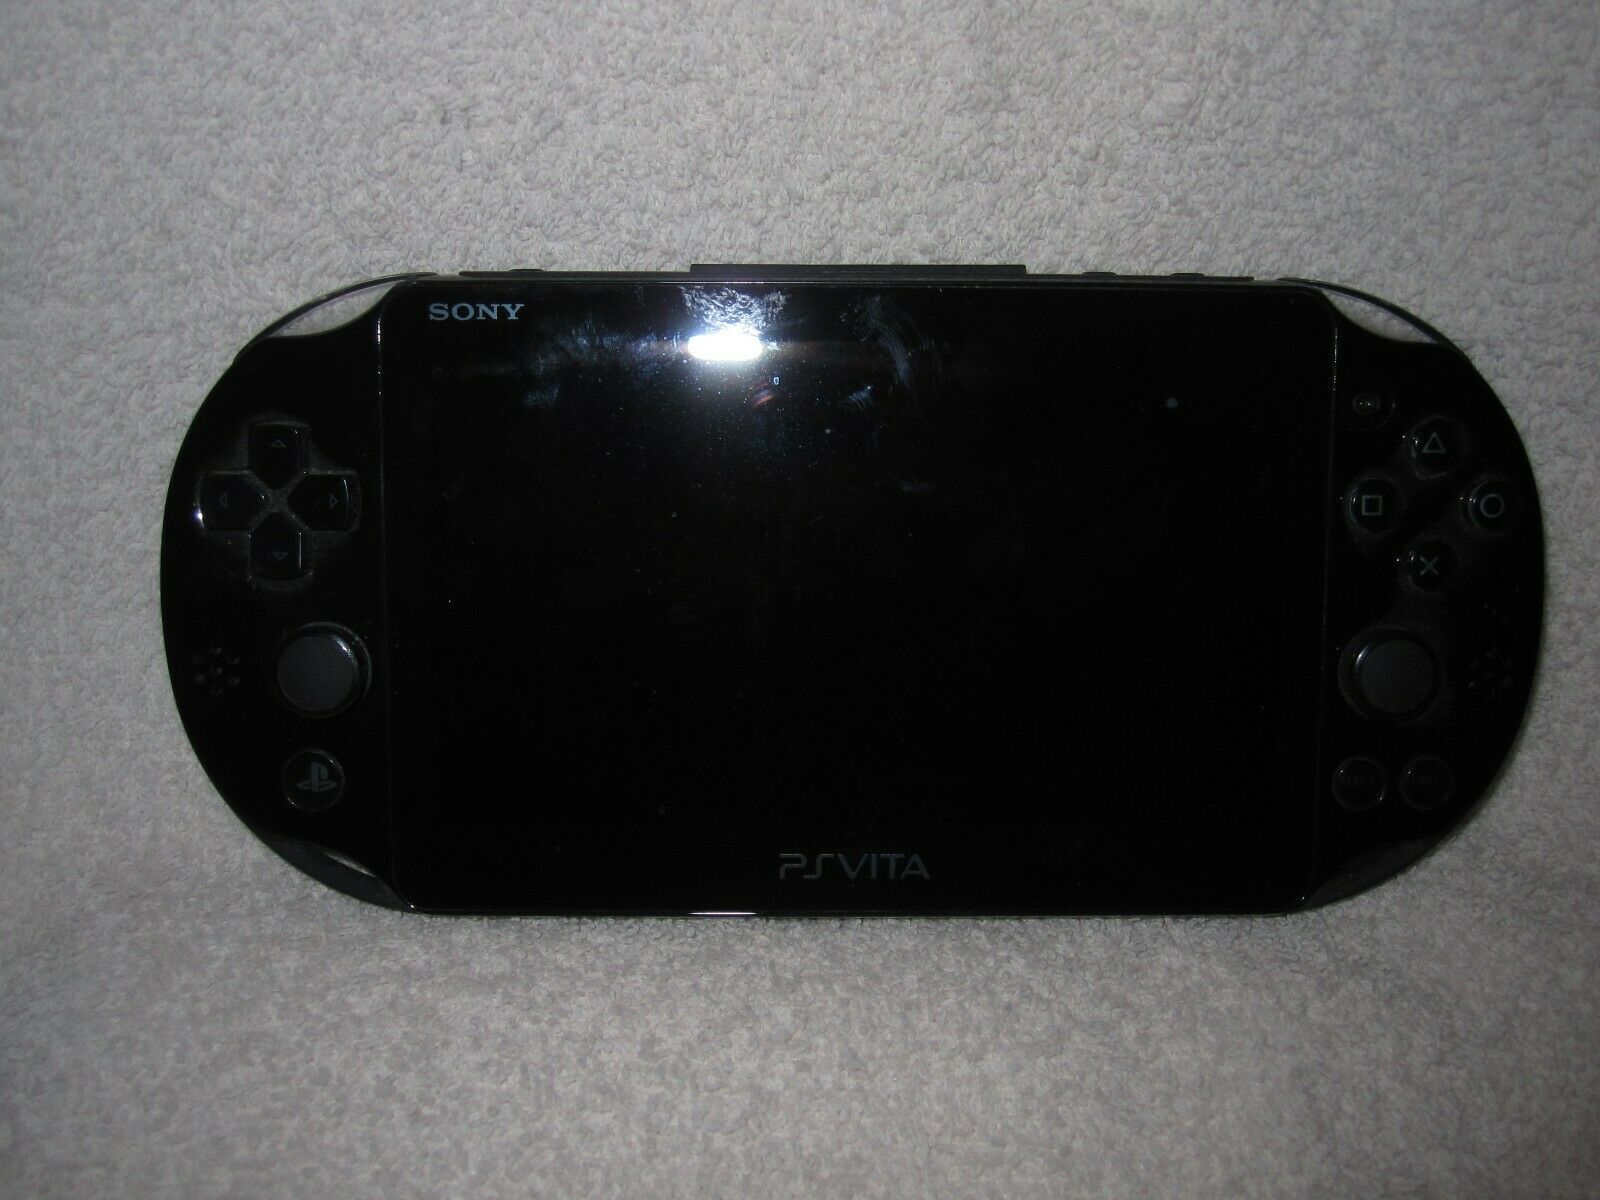 USED SONY PLAYSTATION PCH-2001 VITA ONE GAME - iCommerce on Web